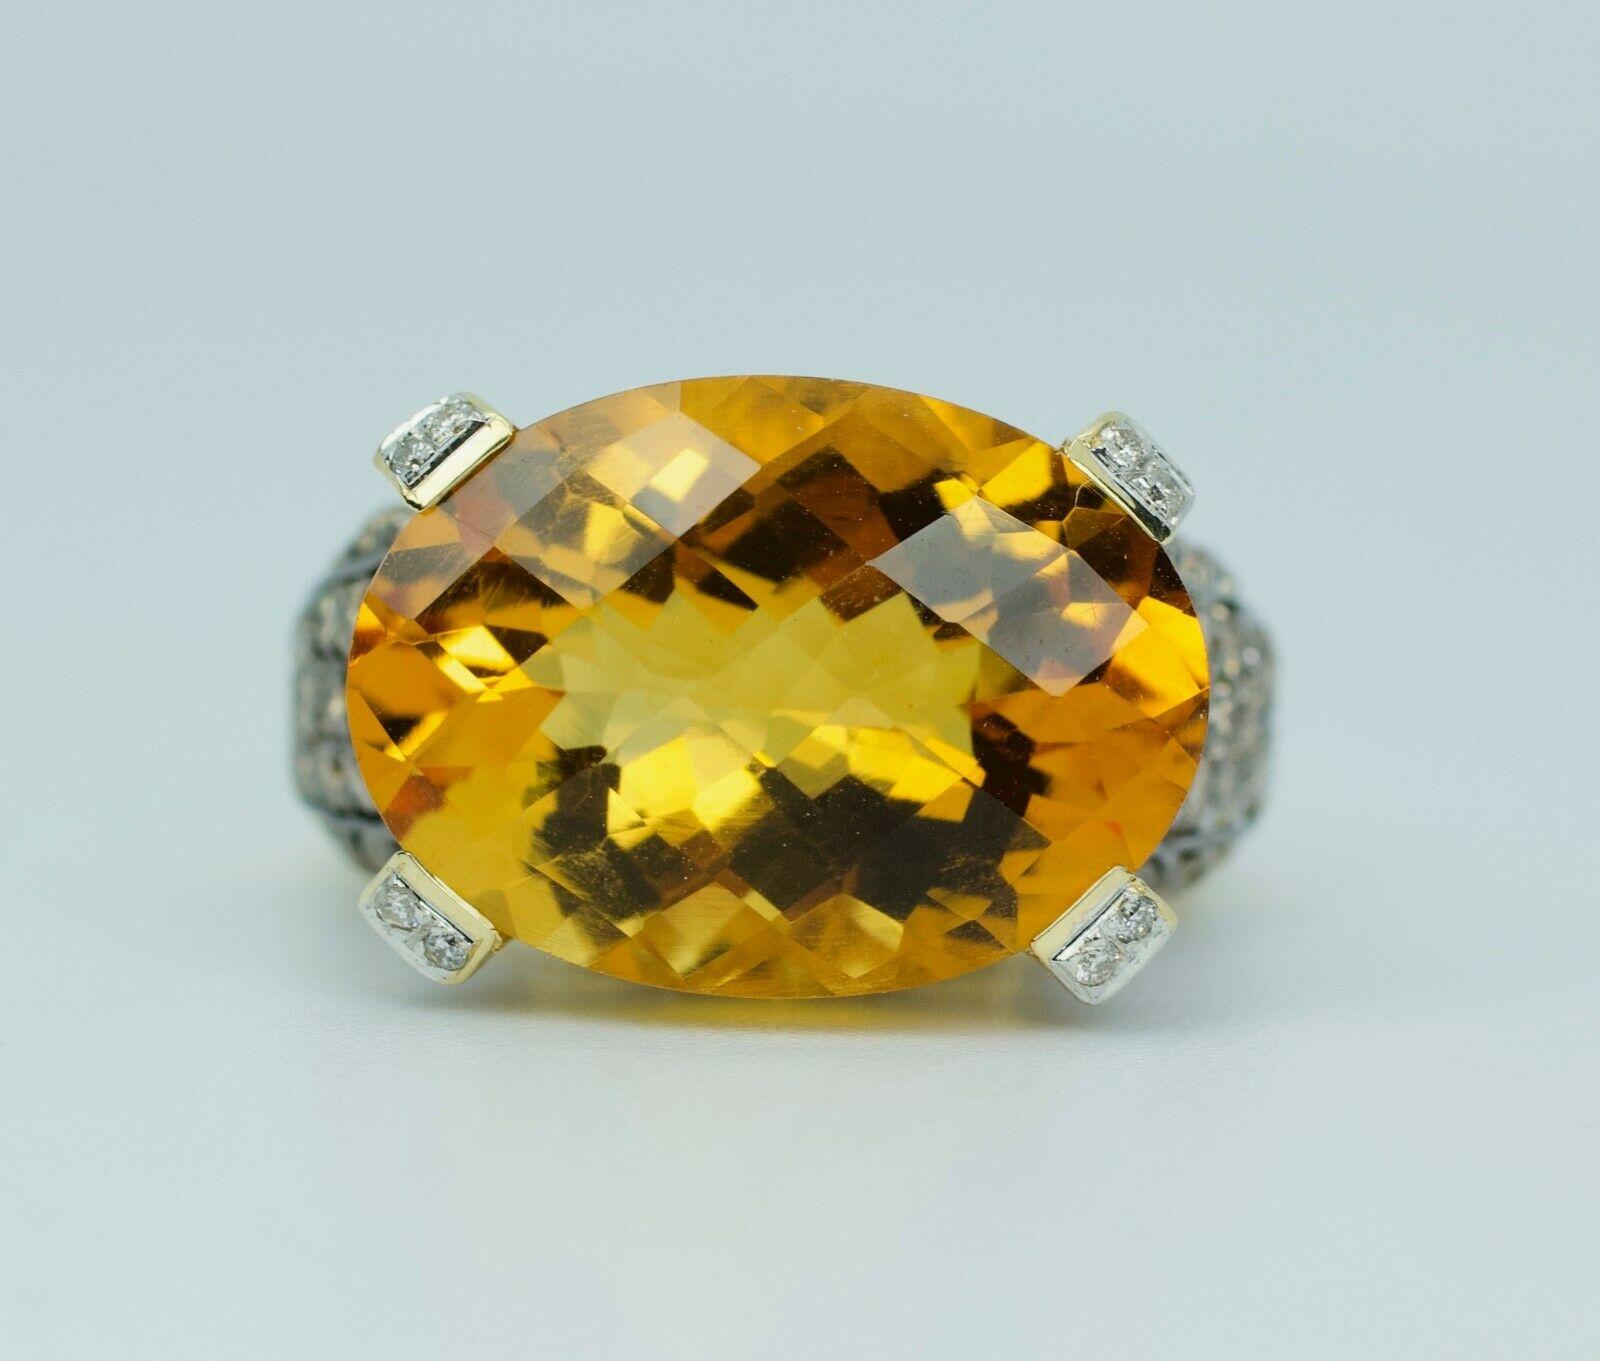 Le Vian 14k Yellow Gold Checkerboard Citrine With Chocolate Diamond Ring

10.1 Grams

Ring Size 7

1 Oval Checkerboard Citrine 18x13mm

Round Chocolate And White Diamonds 2 Carats Total Weight 

This is a beautiful Le Vian ring that shows off this